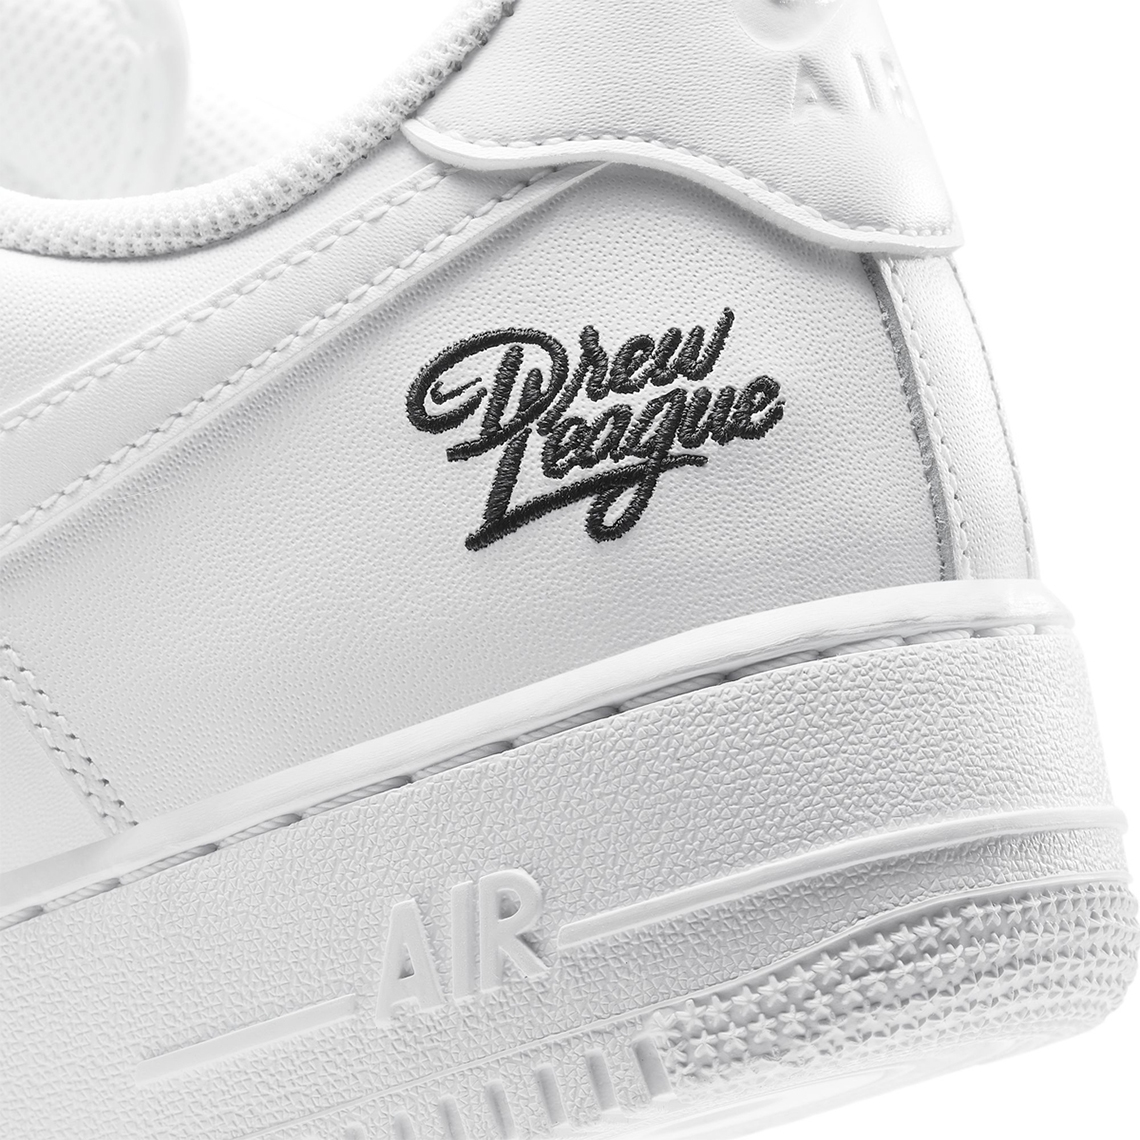 drew league air force 1 release date